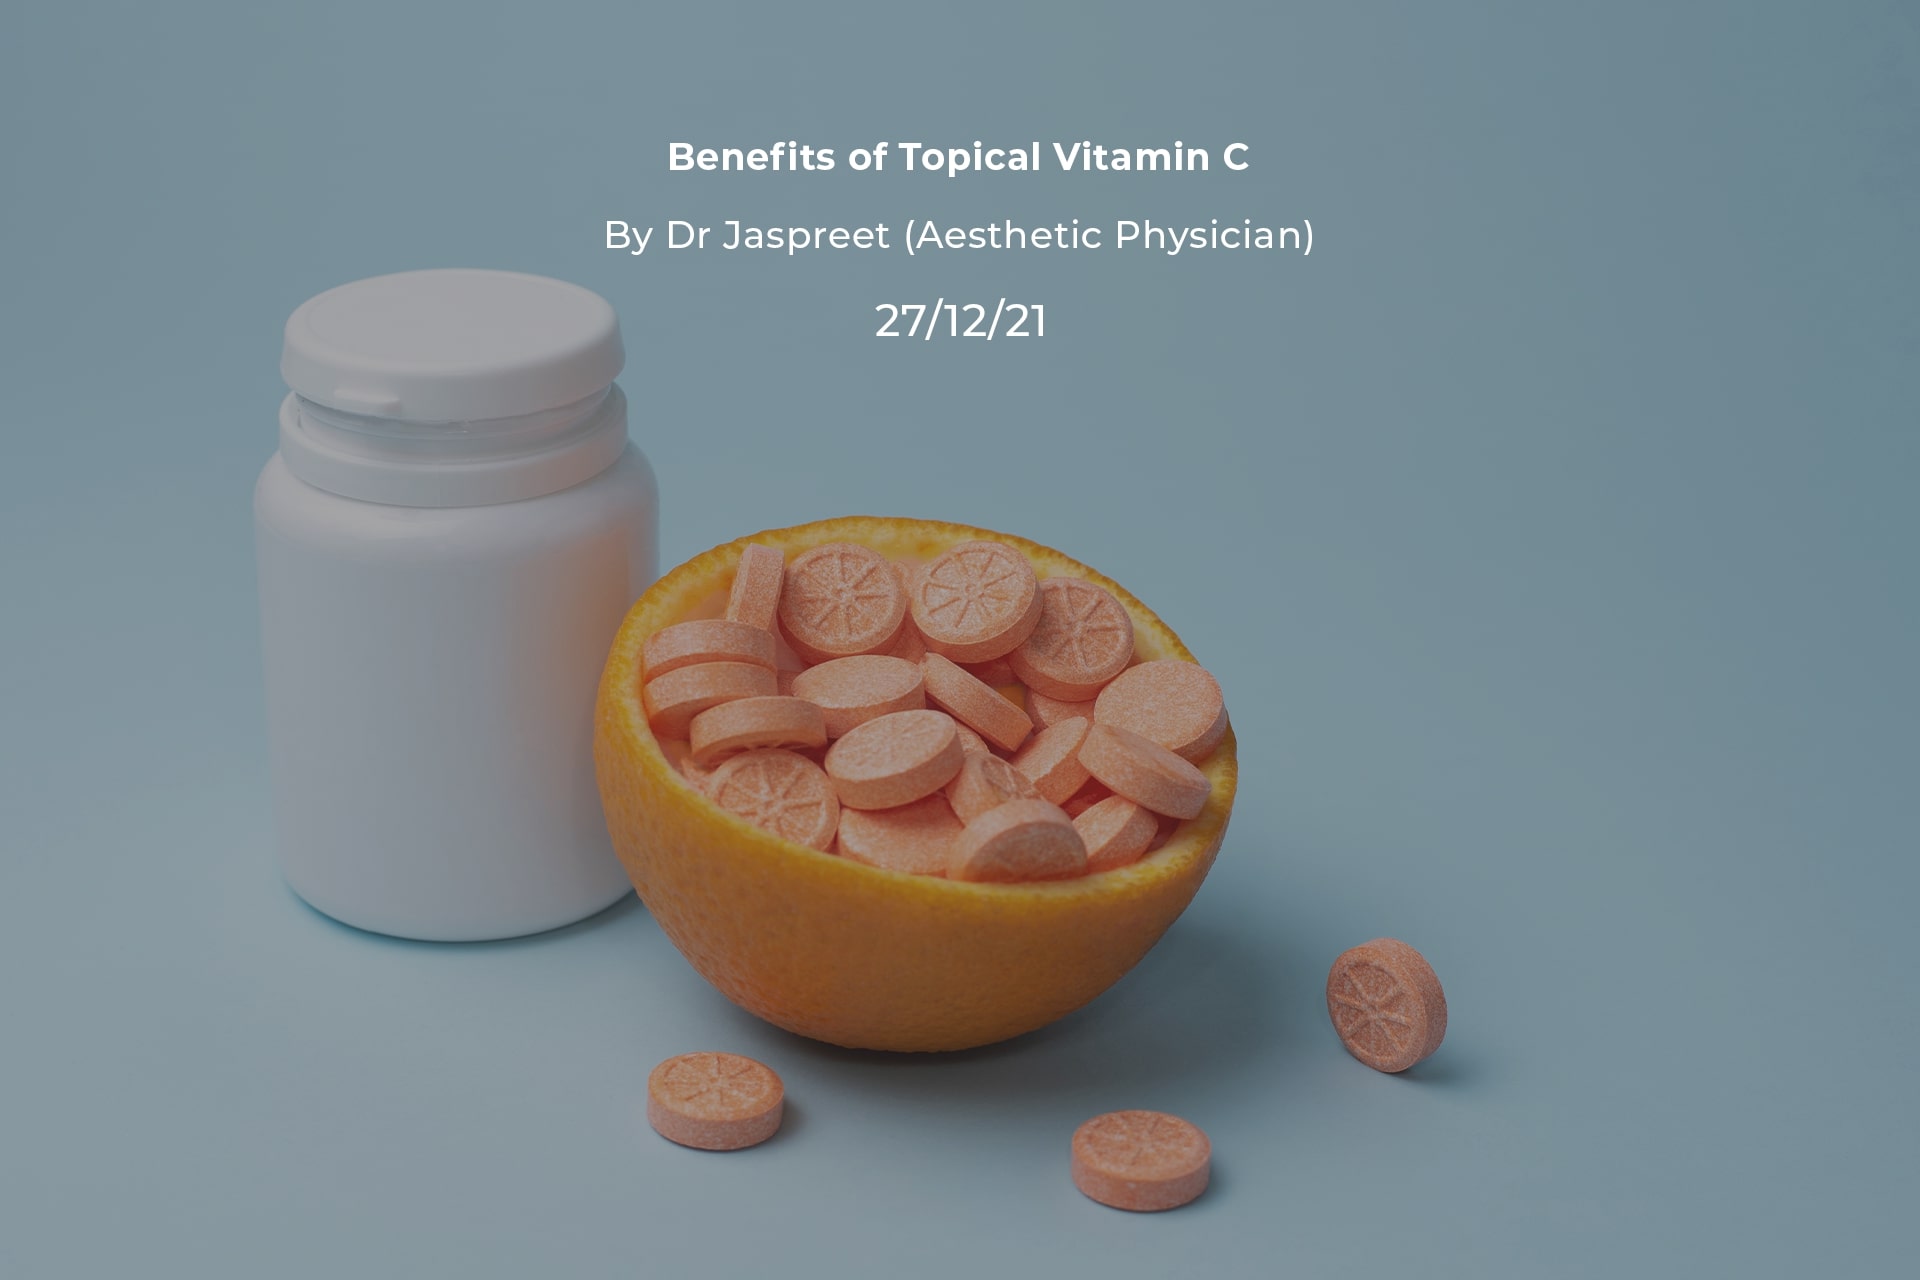 Benefits of Topical Vitamin C